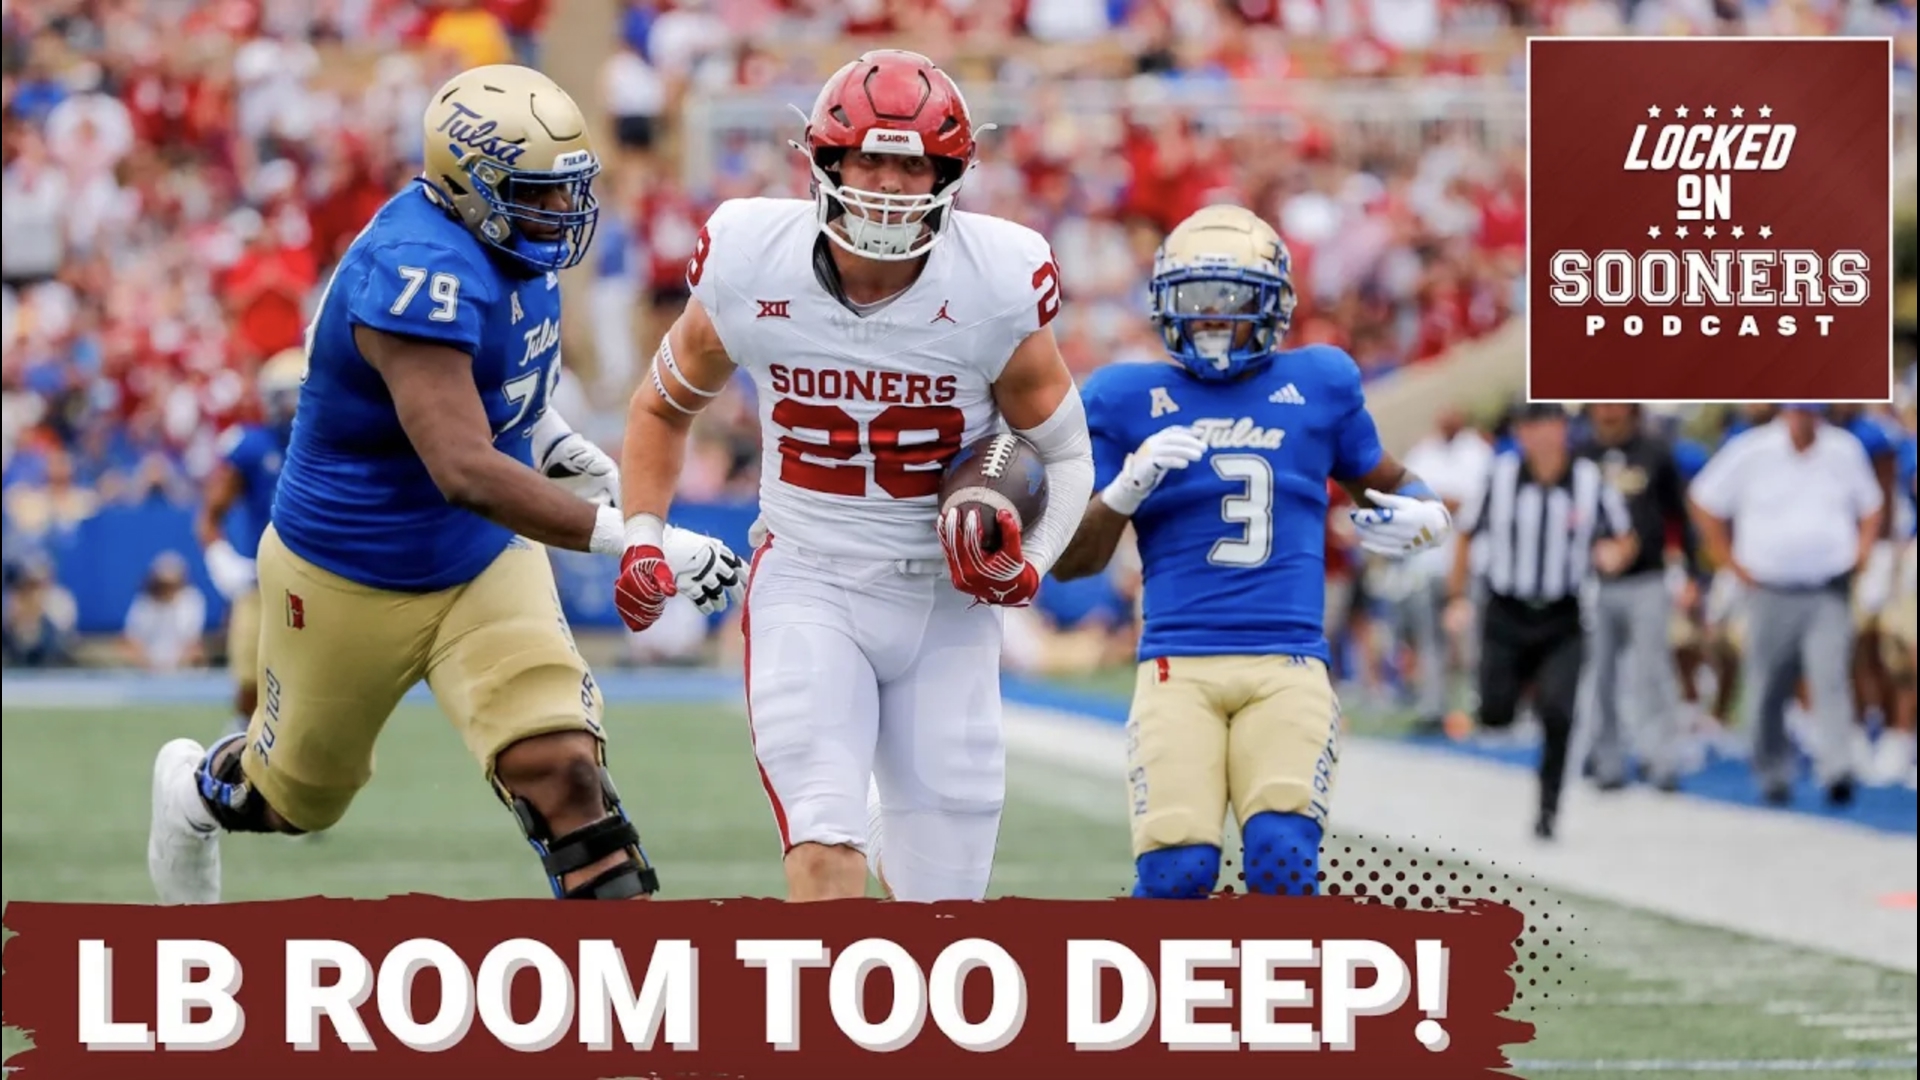 The Oklahoma Sooners have a deep linebacker room led by Danny Stutsman. Their versatility will be an asset for the Sooners